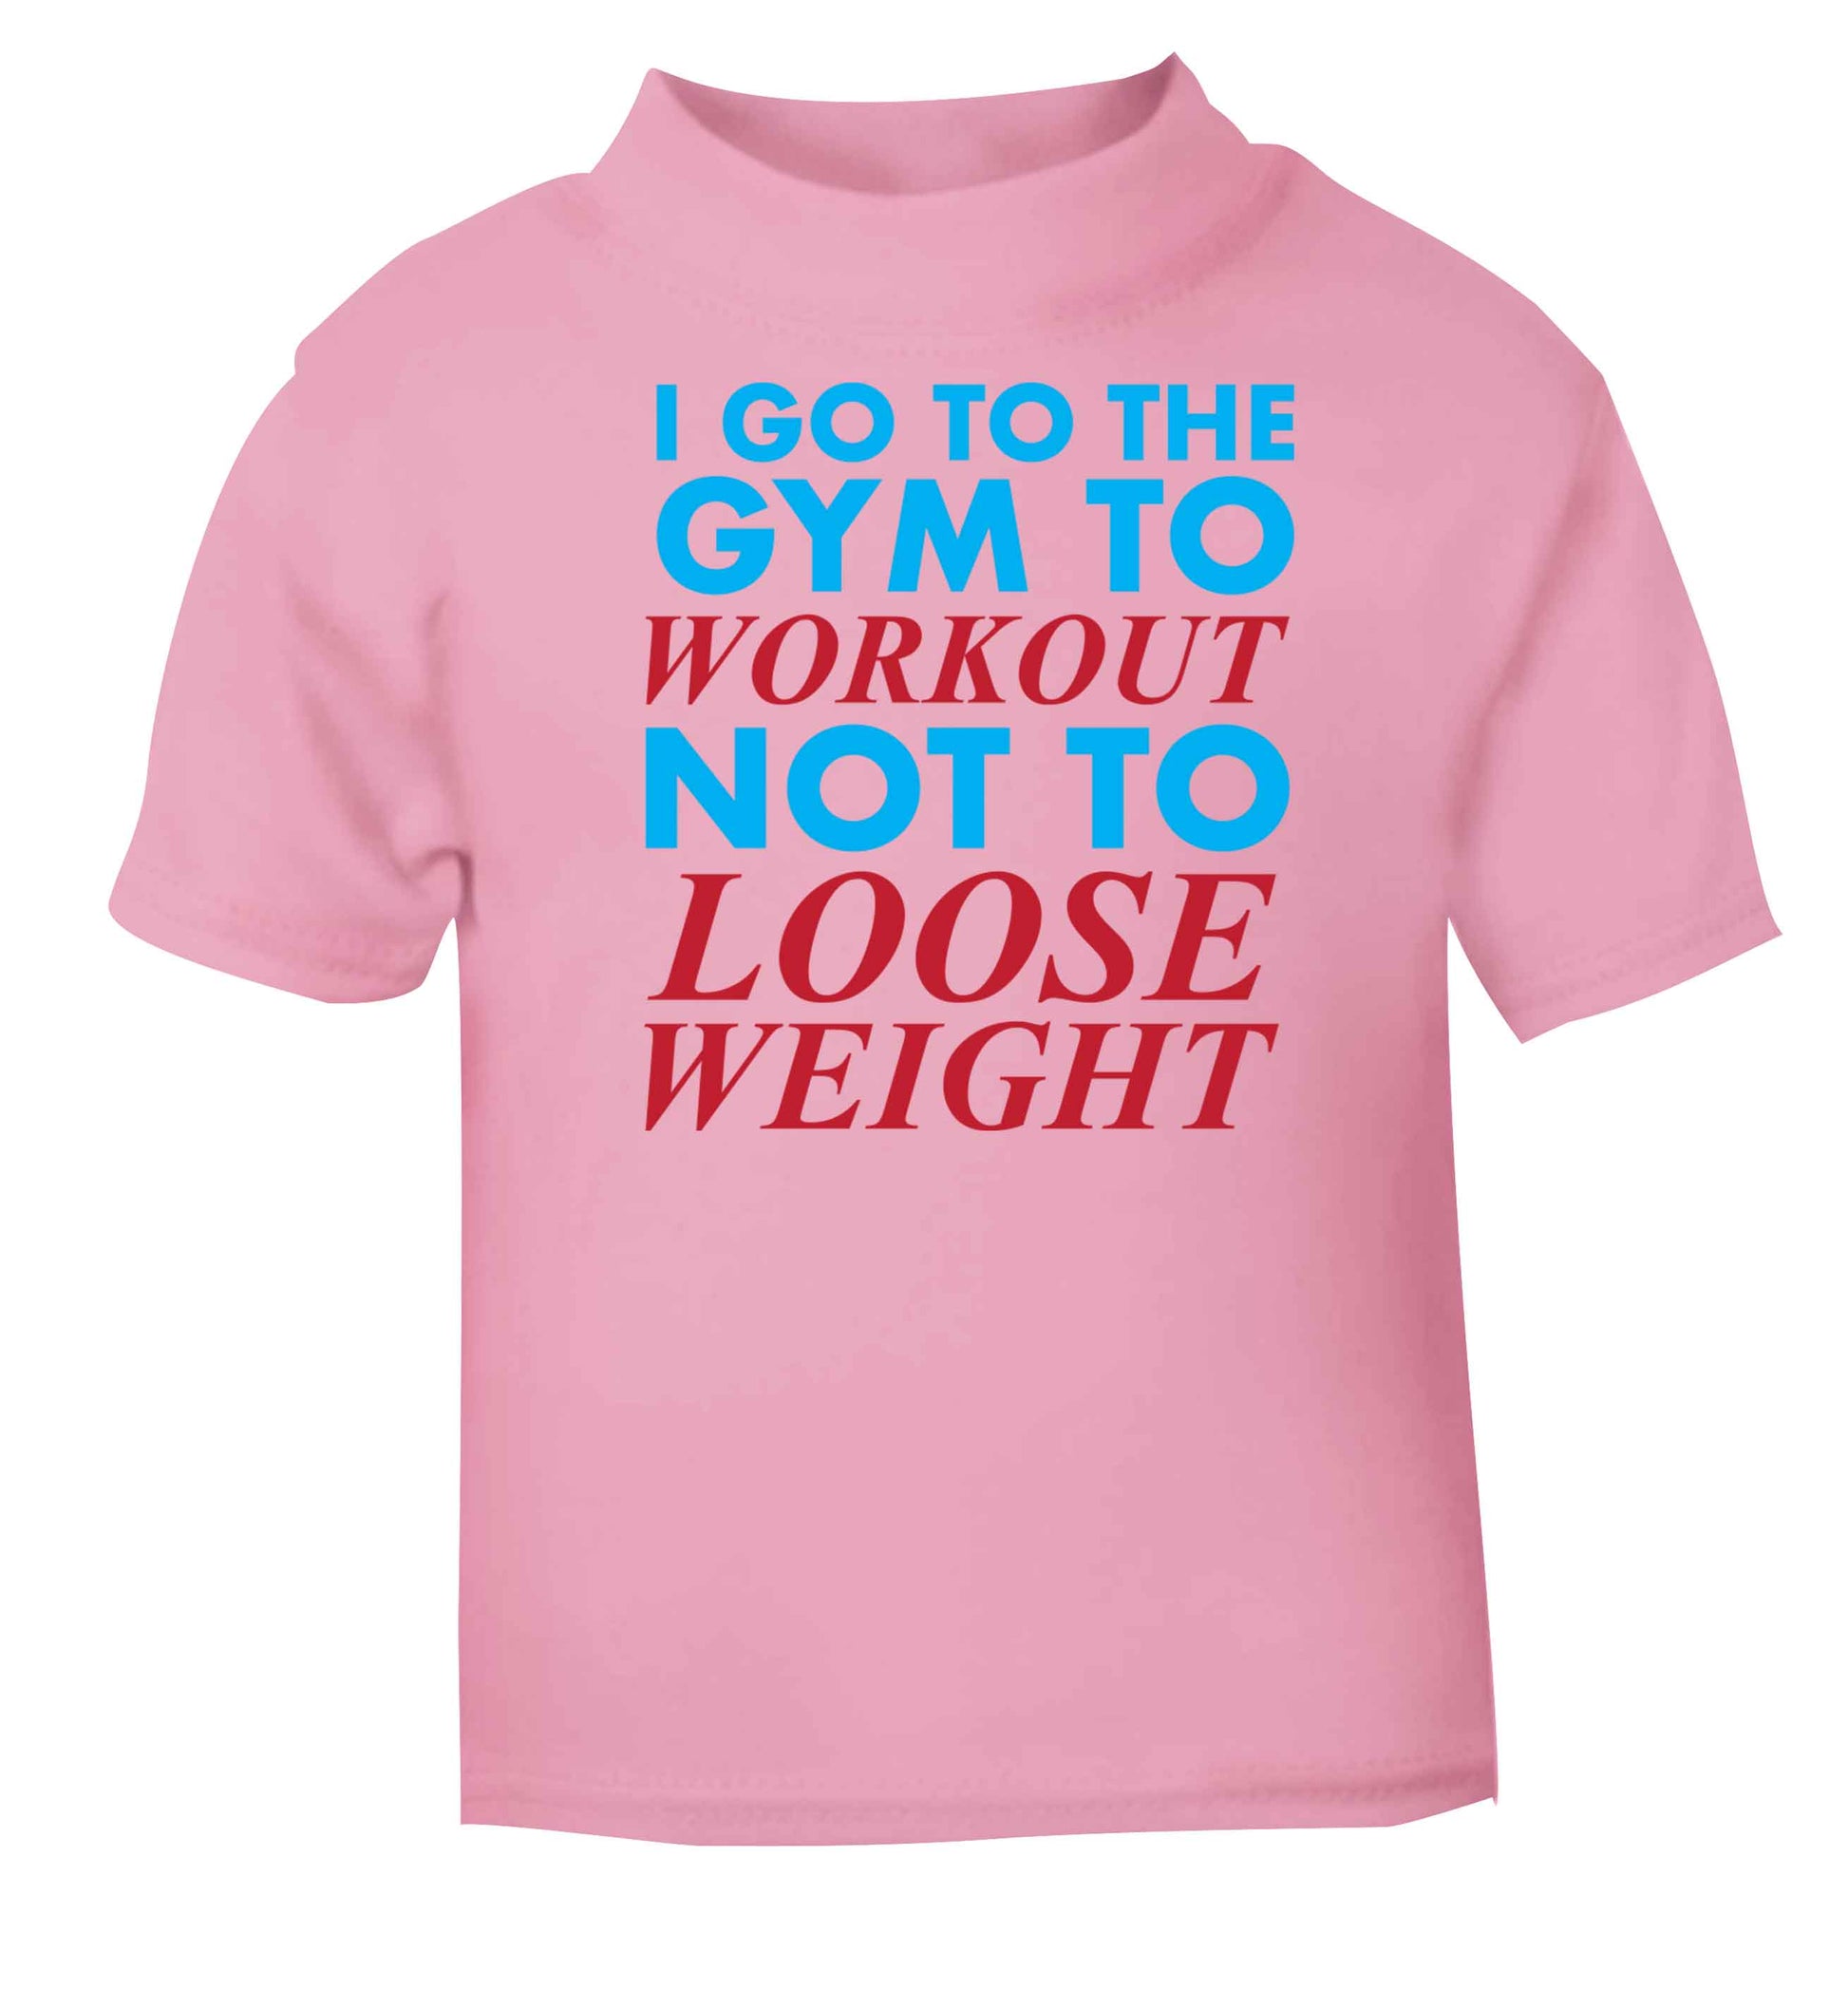 I go to the gym to workout not to loose weight light pink baby toddler Tshirt 2 Years